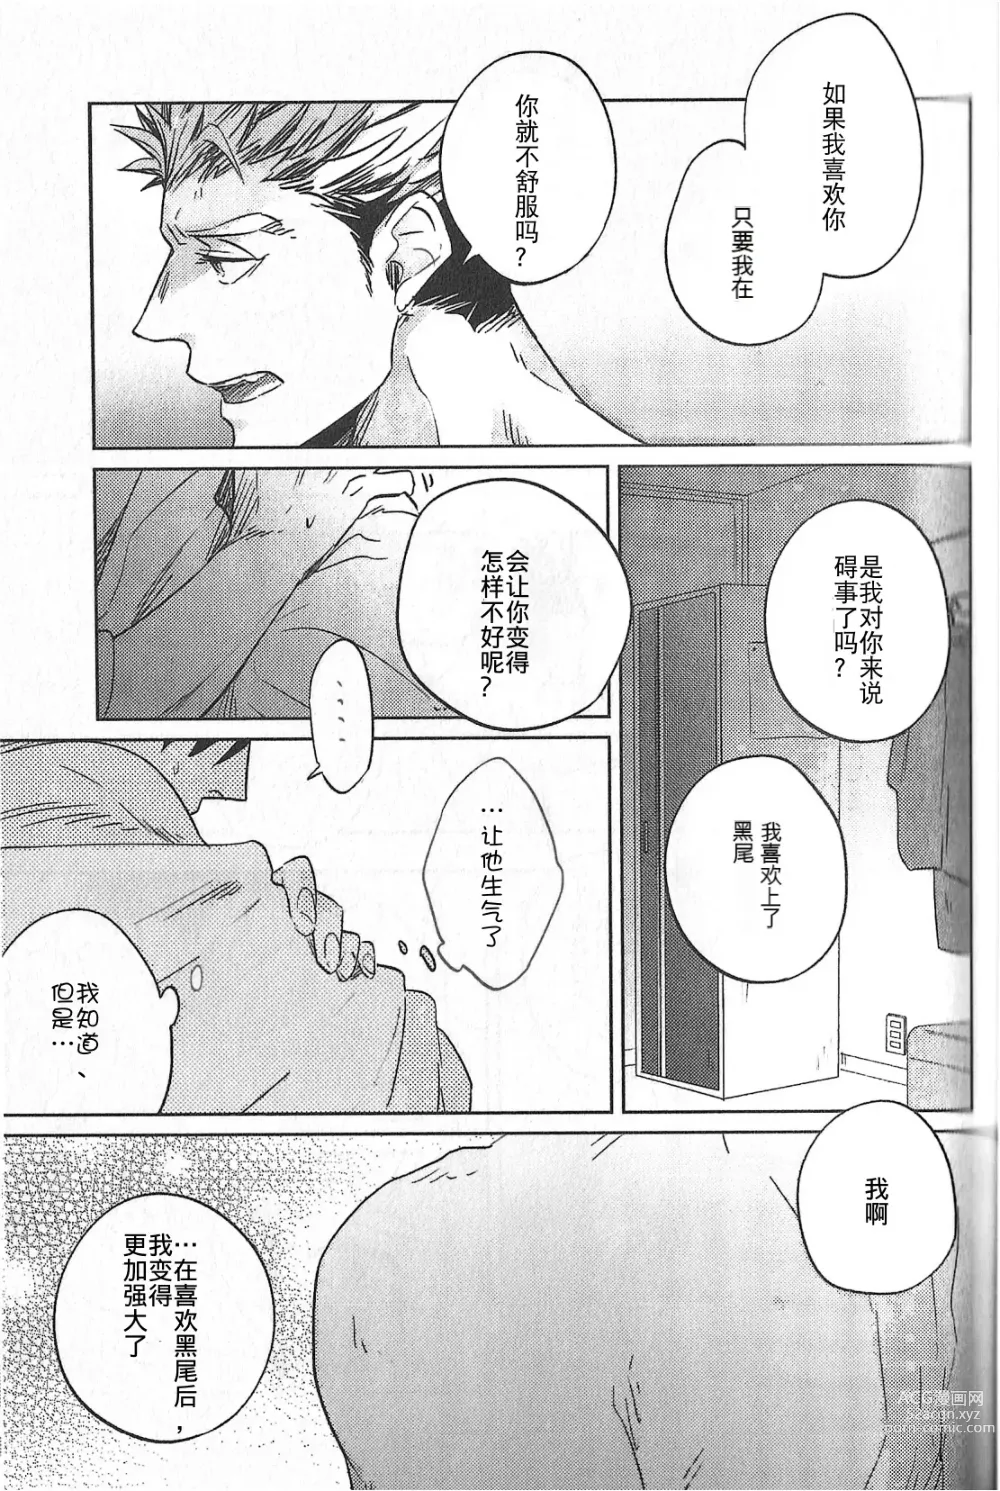 Page 12 of doujinshi 极境的野兽 后篇